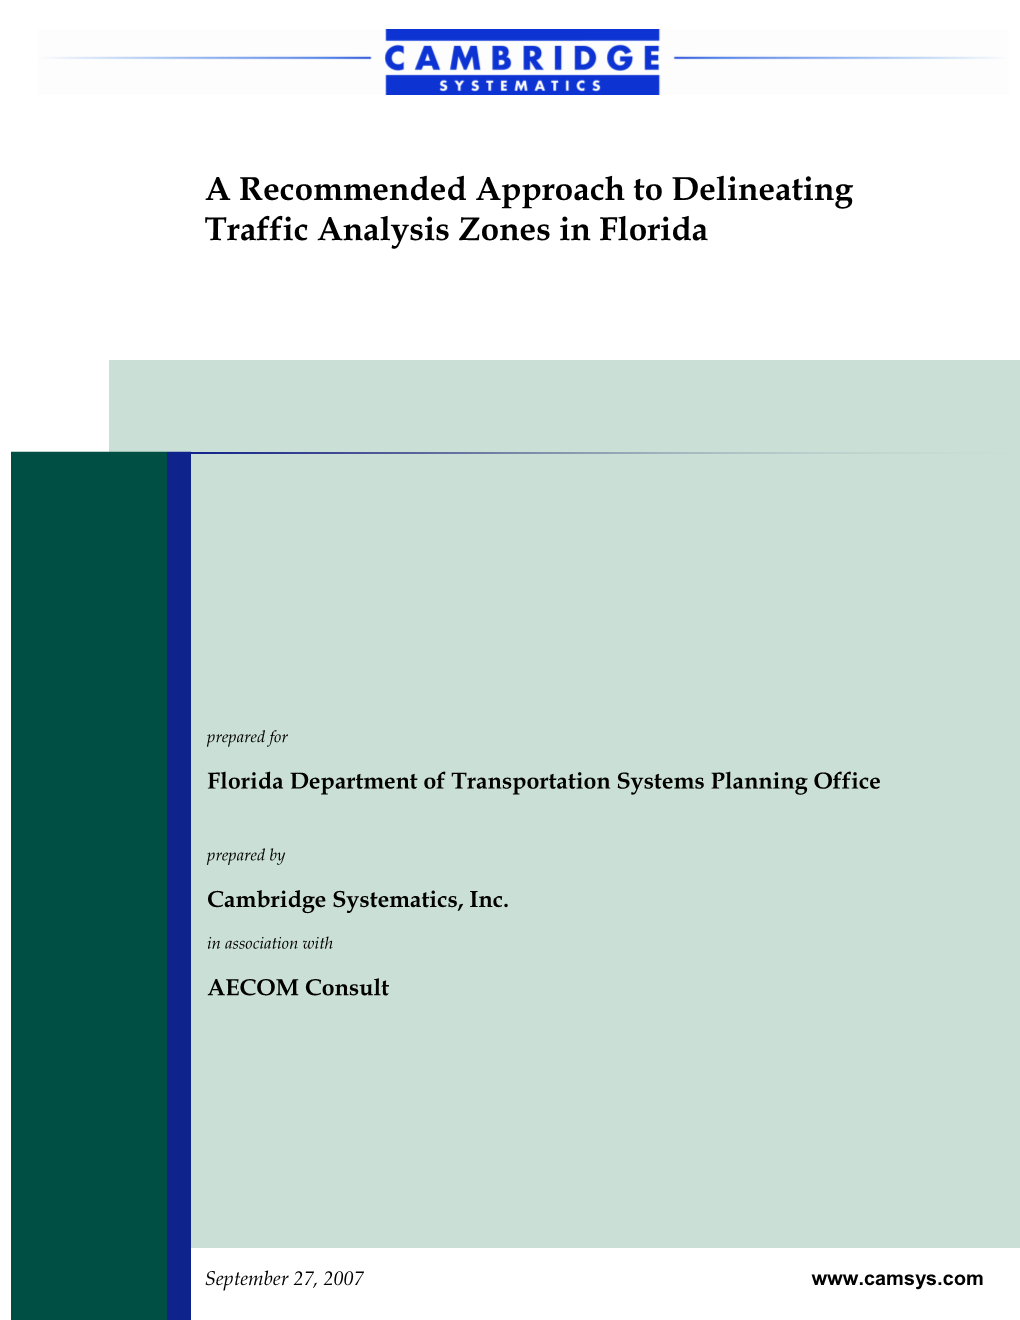 A Recommended Approach to Delineating Traffic Analysis Zones in Florida